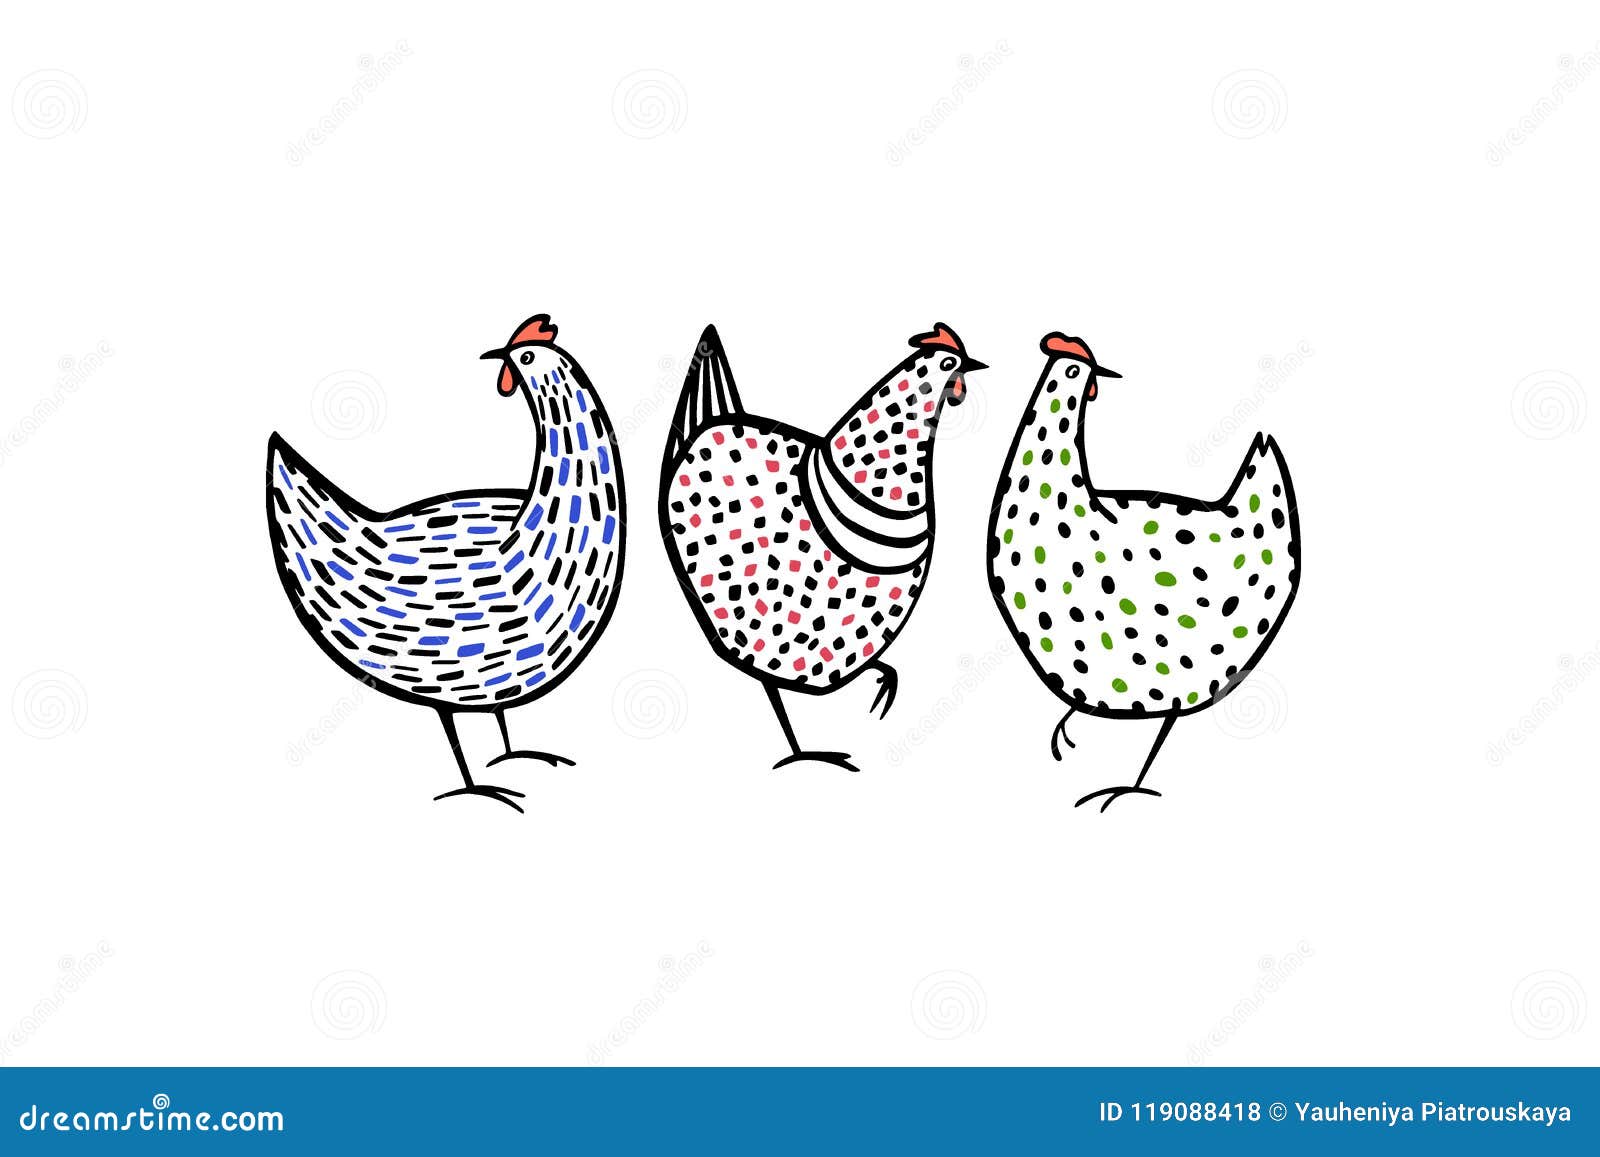 Hand drawn chickens stock vector. Illustration of cooking - 119088418